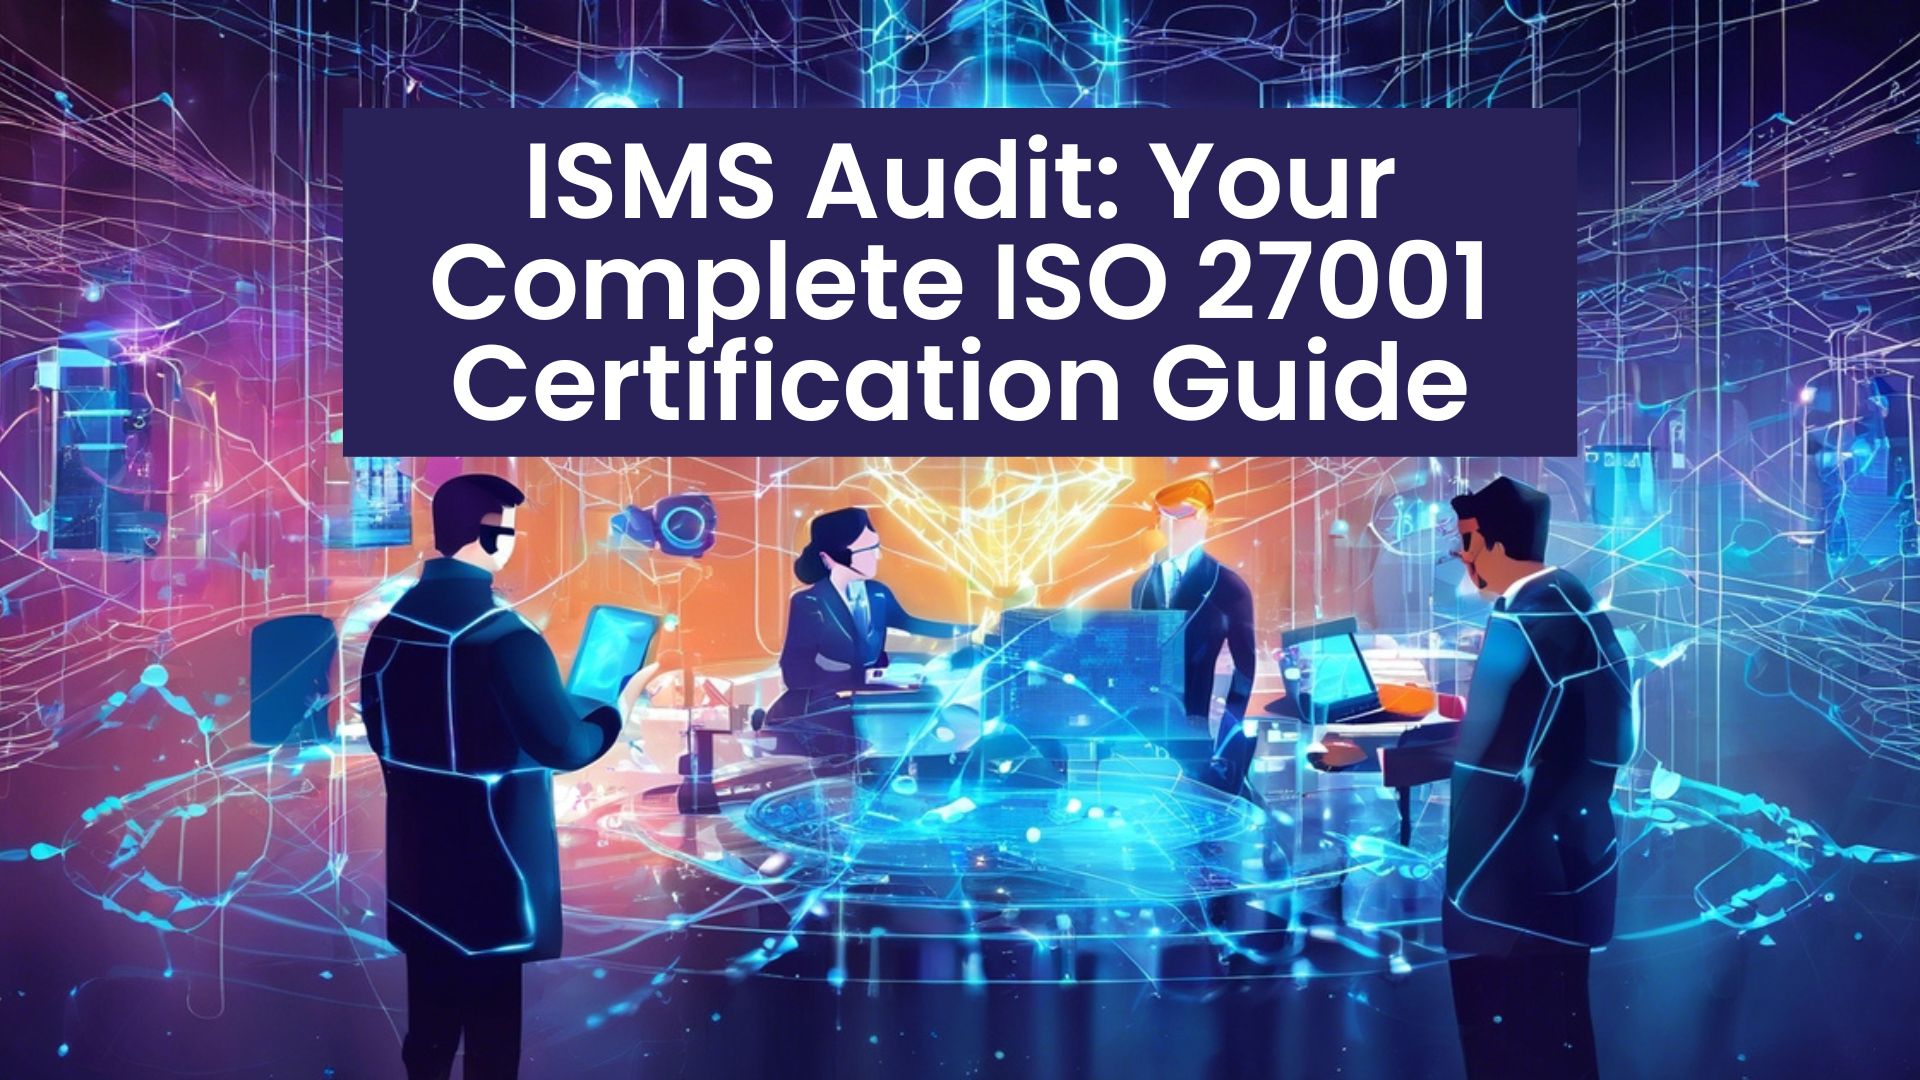 ISMS Audit Your Complete ISO 27001 Certification Guide